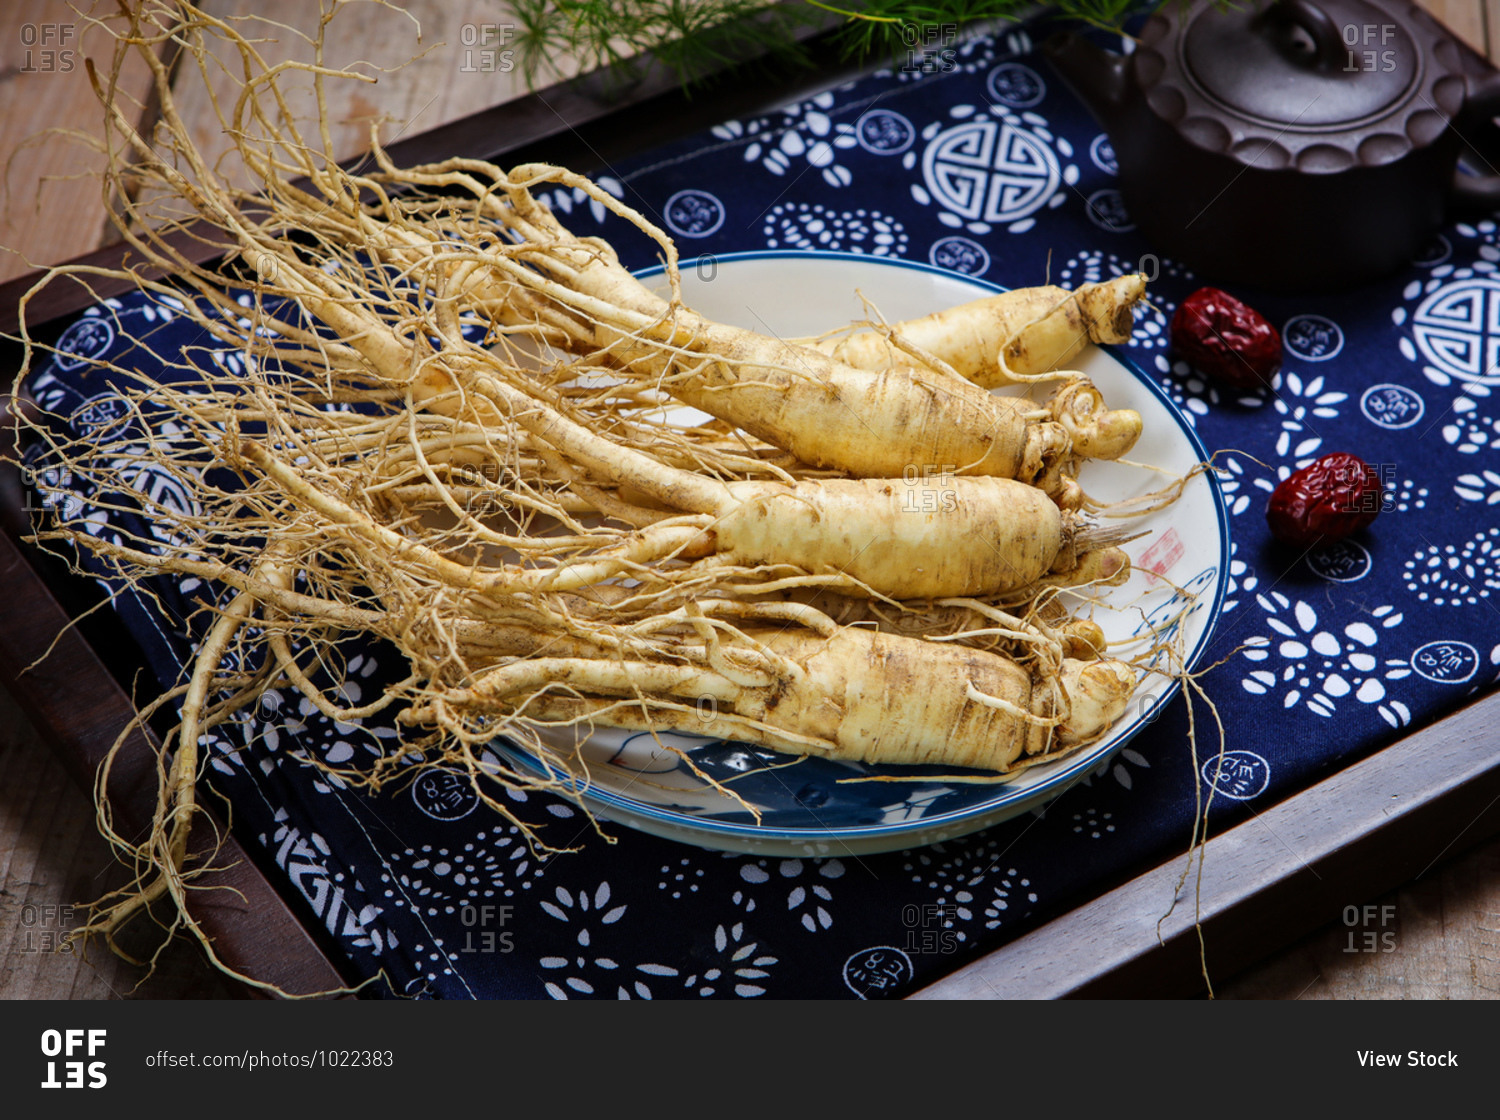 Fresh ginseng root set out on a platter